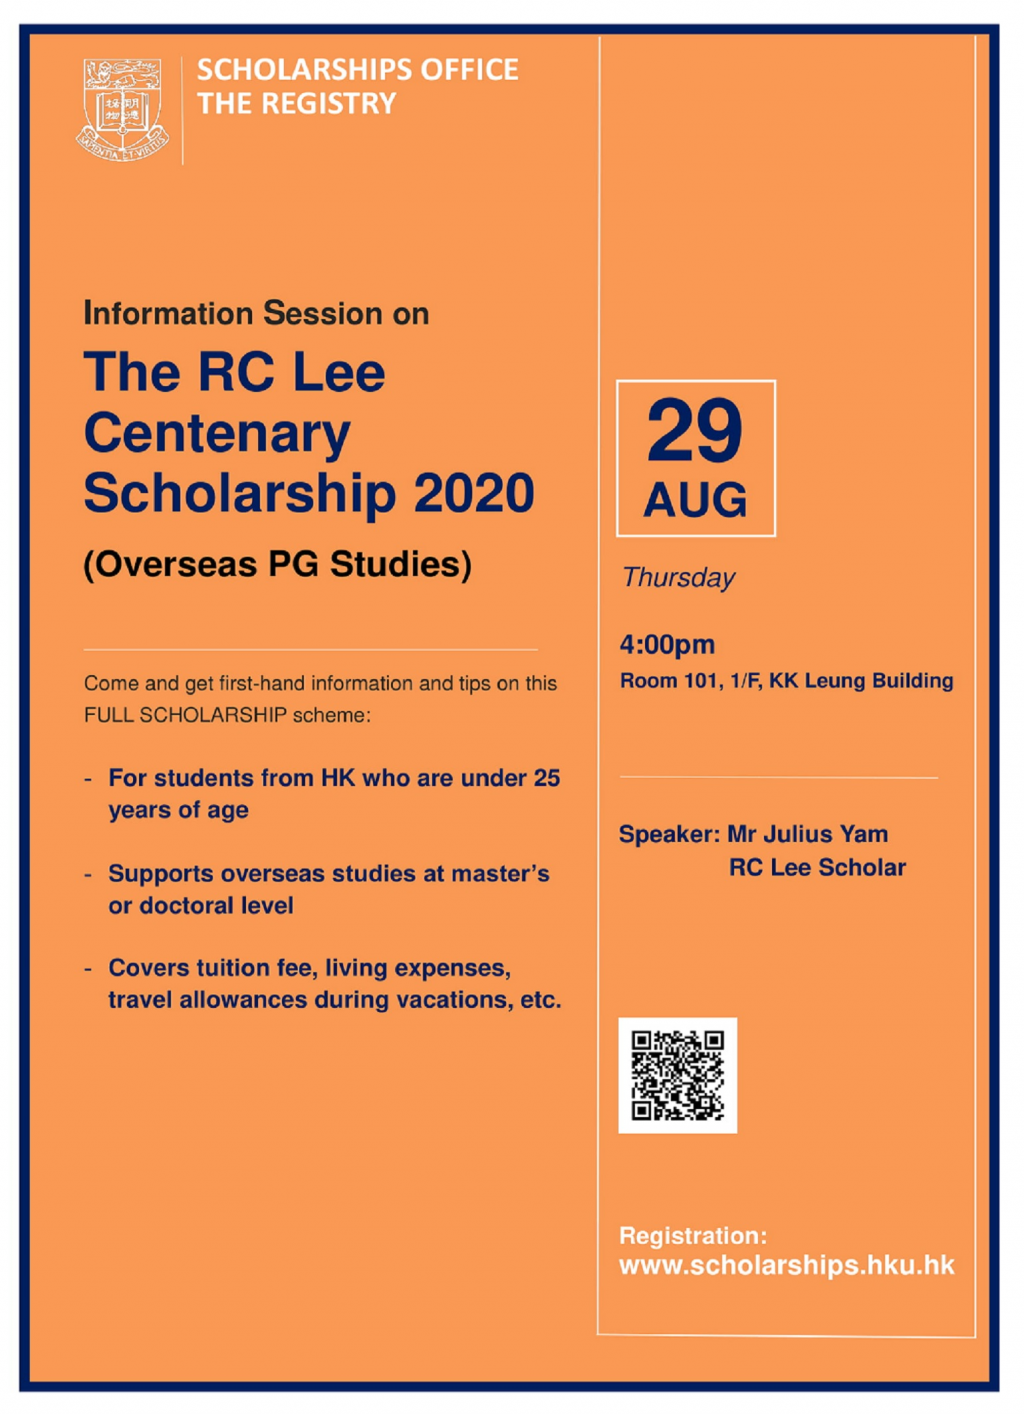 Information Session on RC Lee Centenary Overseas PG Scholarship